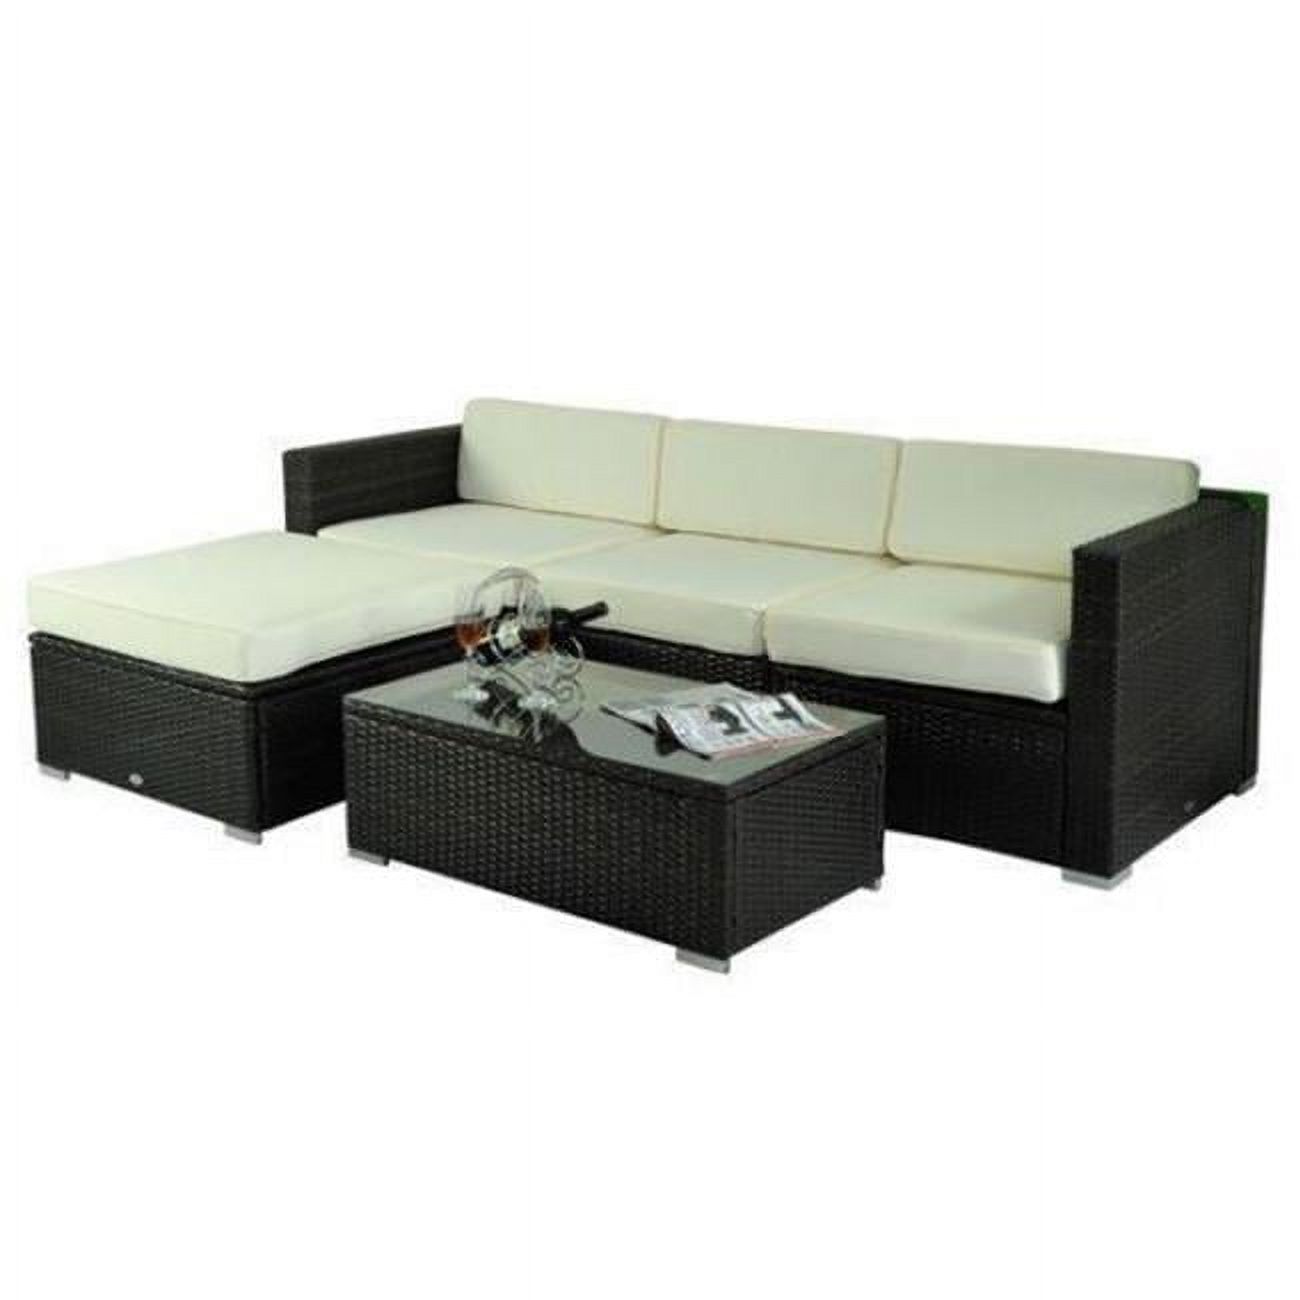 Online Gym Shop CB15460 Outdoor Patio PE Rattan Wicker Sofa Chaise Lounge Furniture - 5 Piece - image 1 of 10